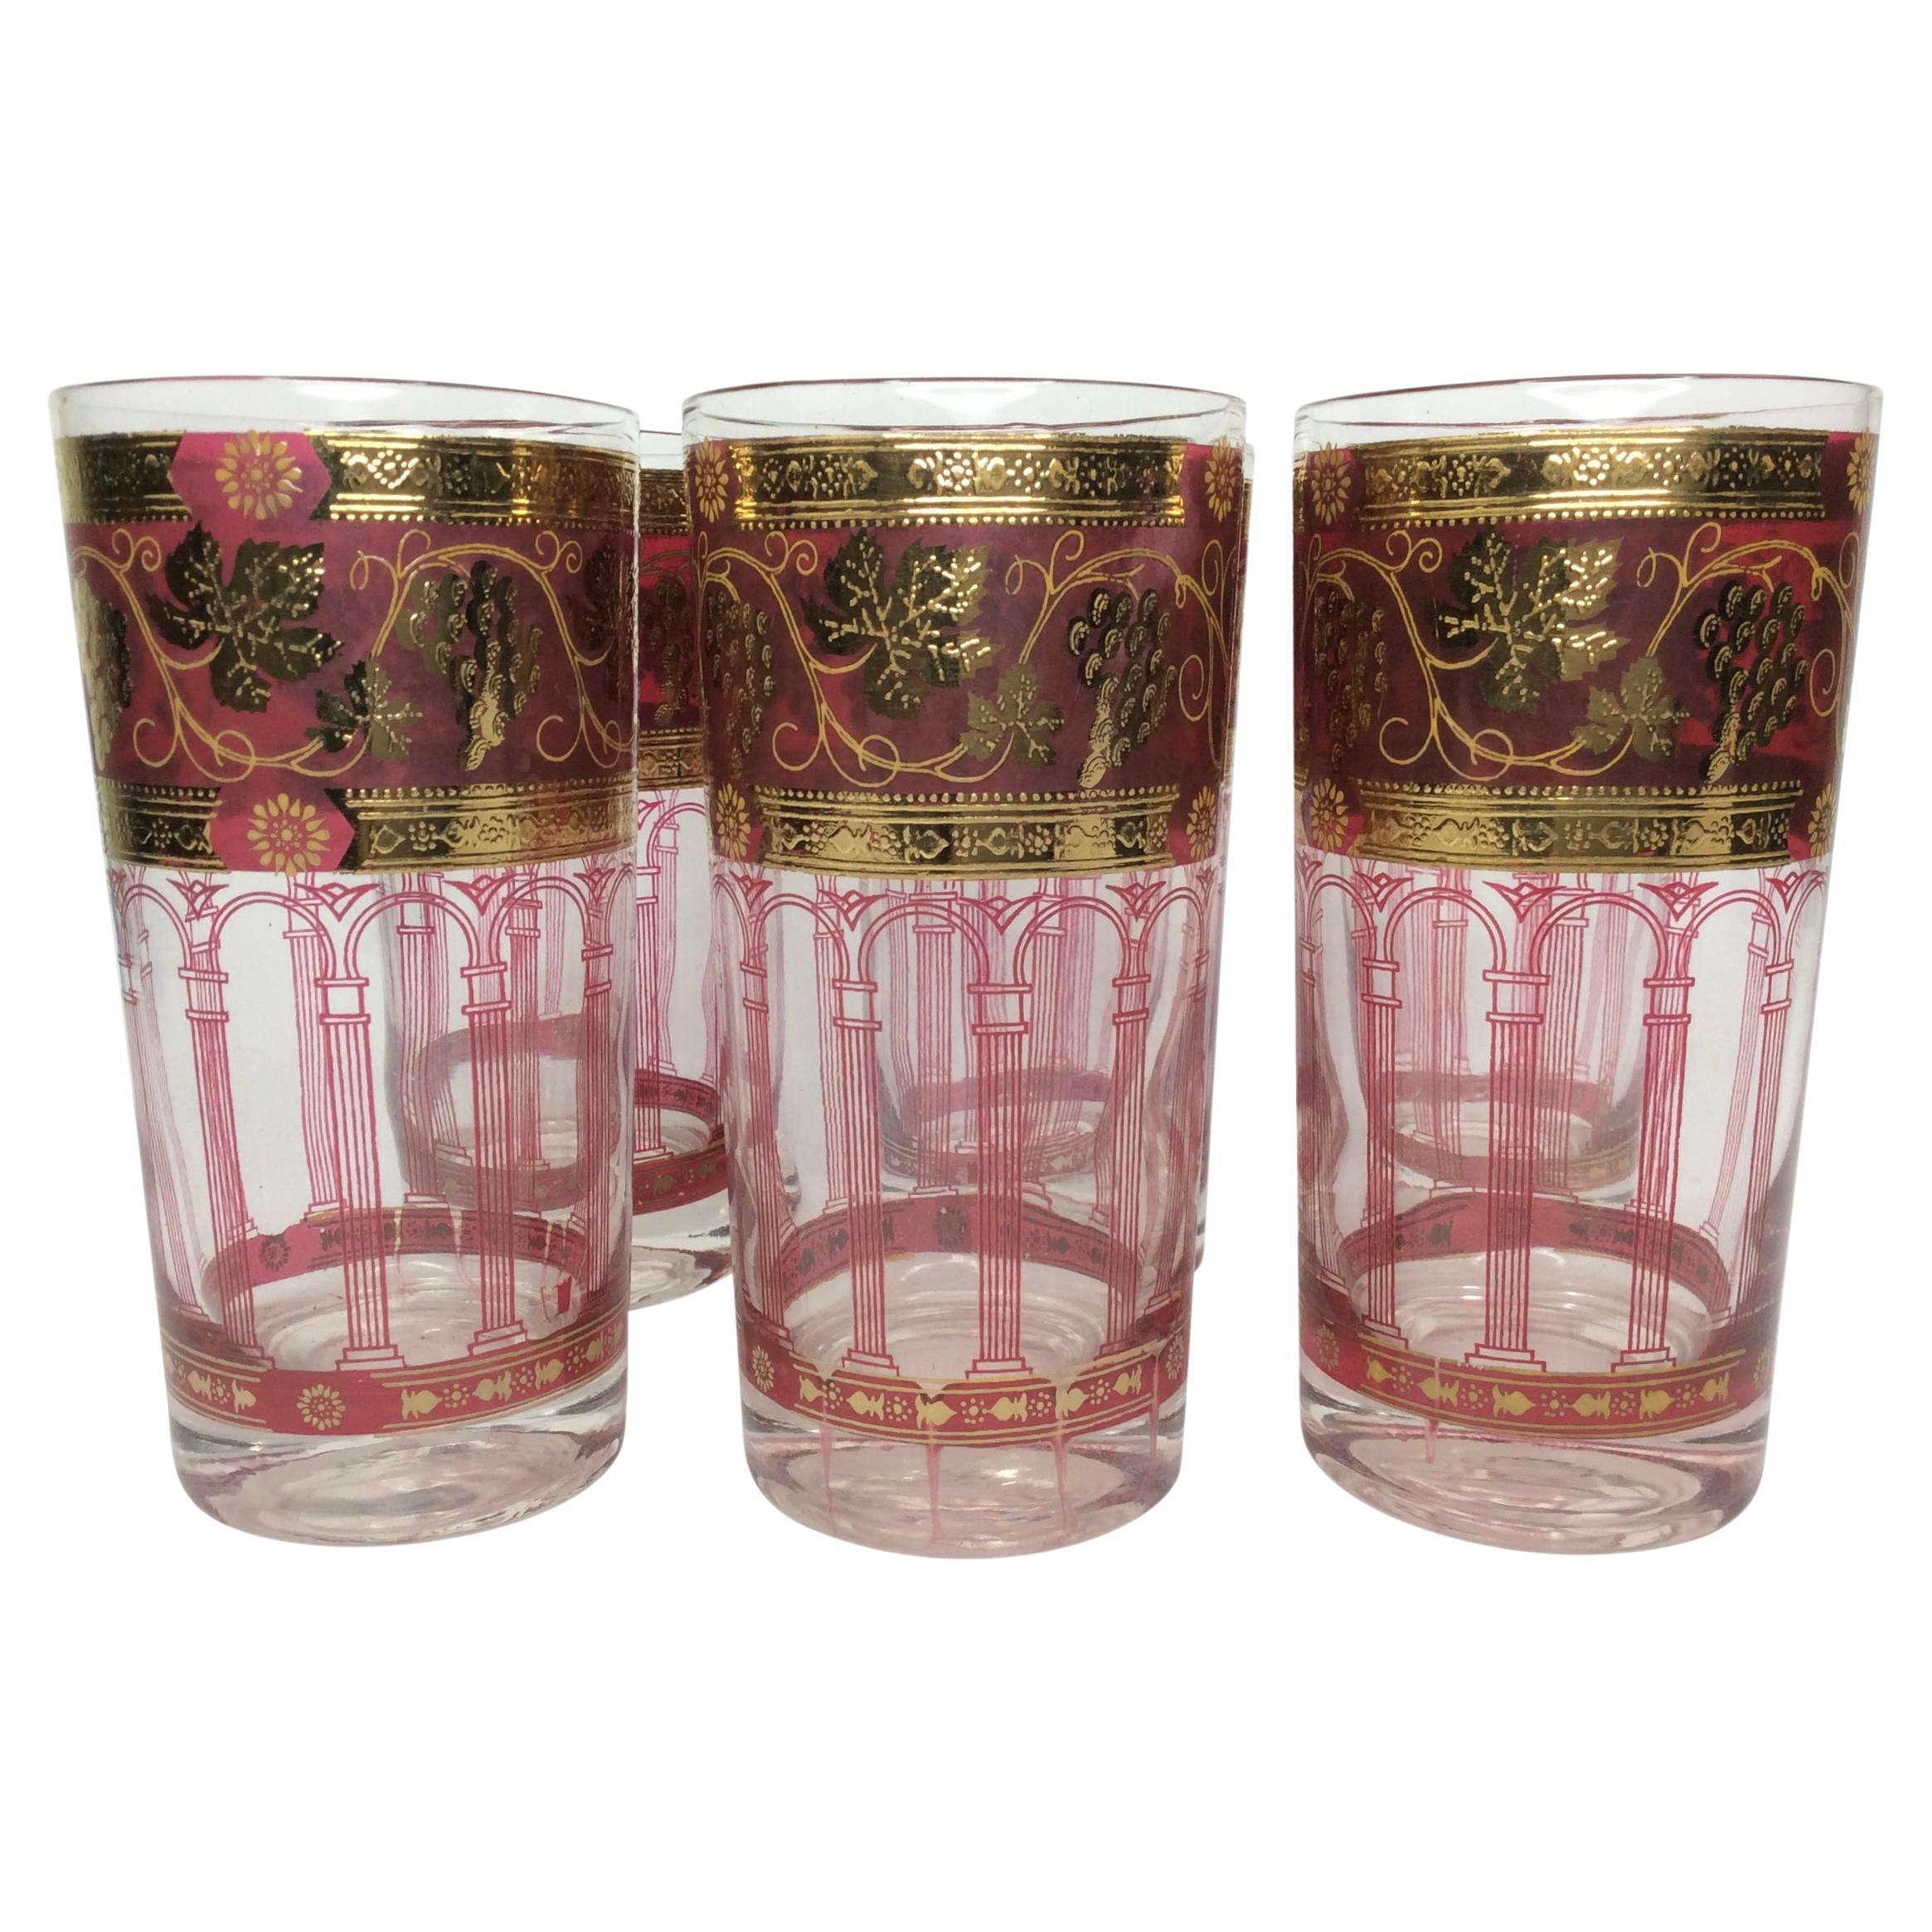 Vintage Cera Highball Glasses with Grapes and Arched Columns - Set of 6